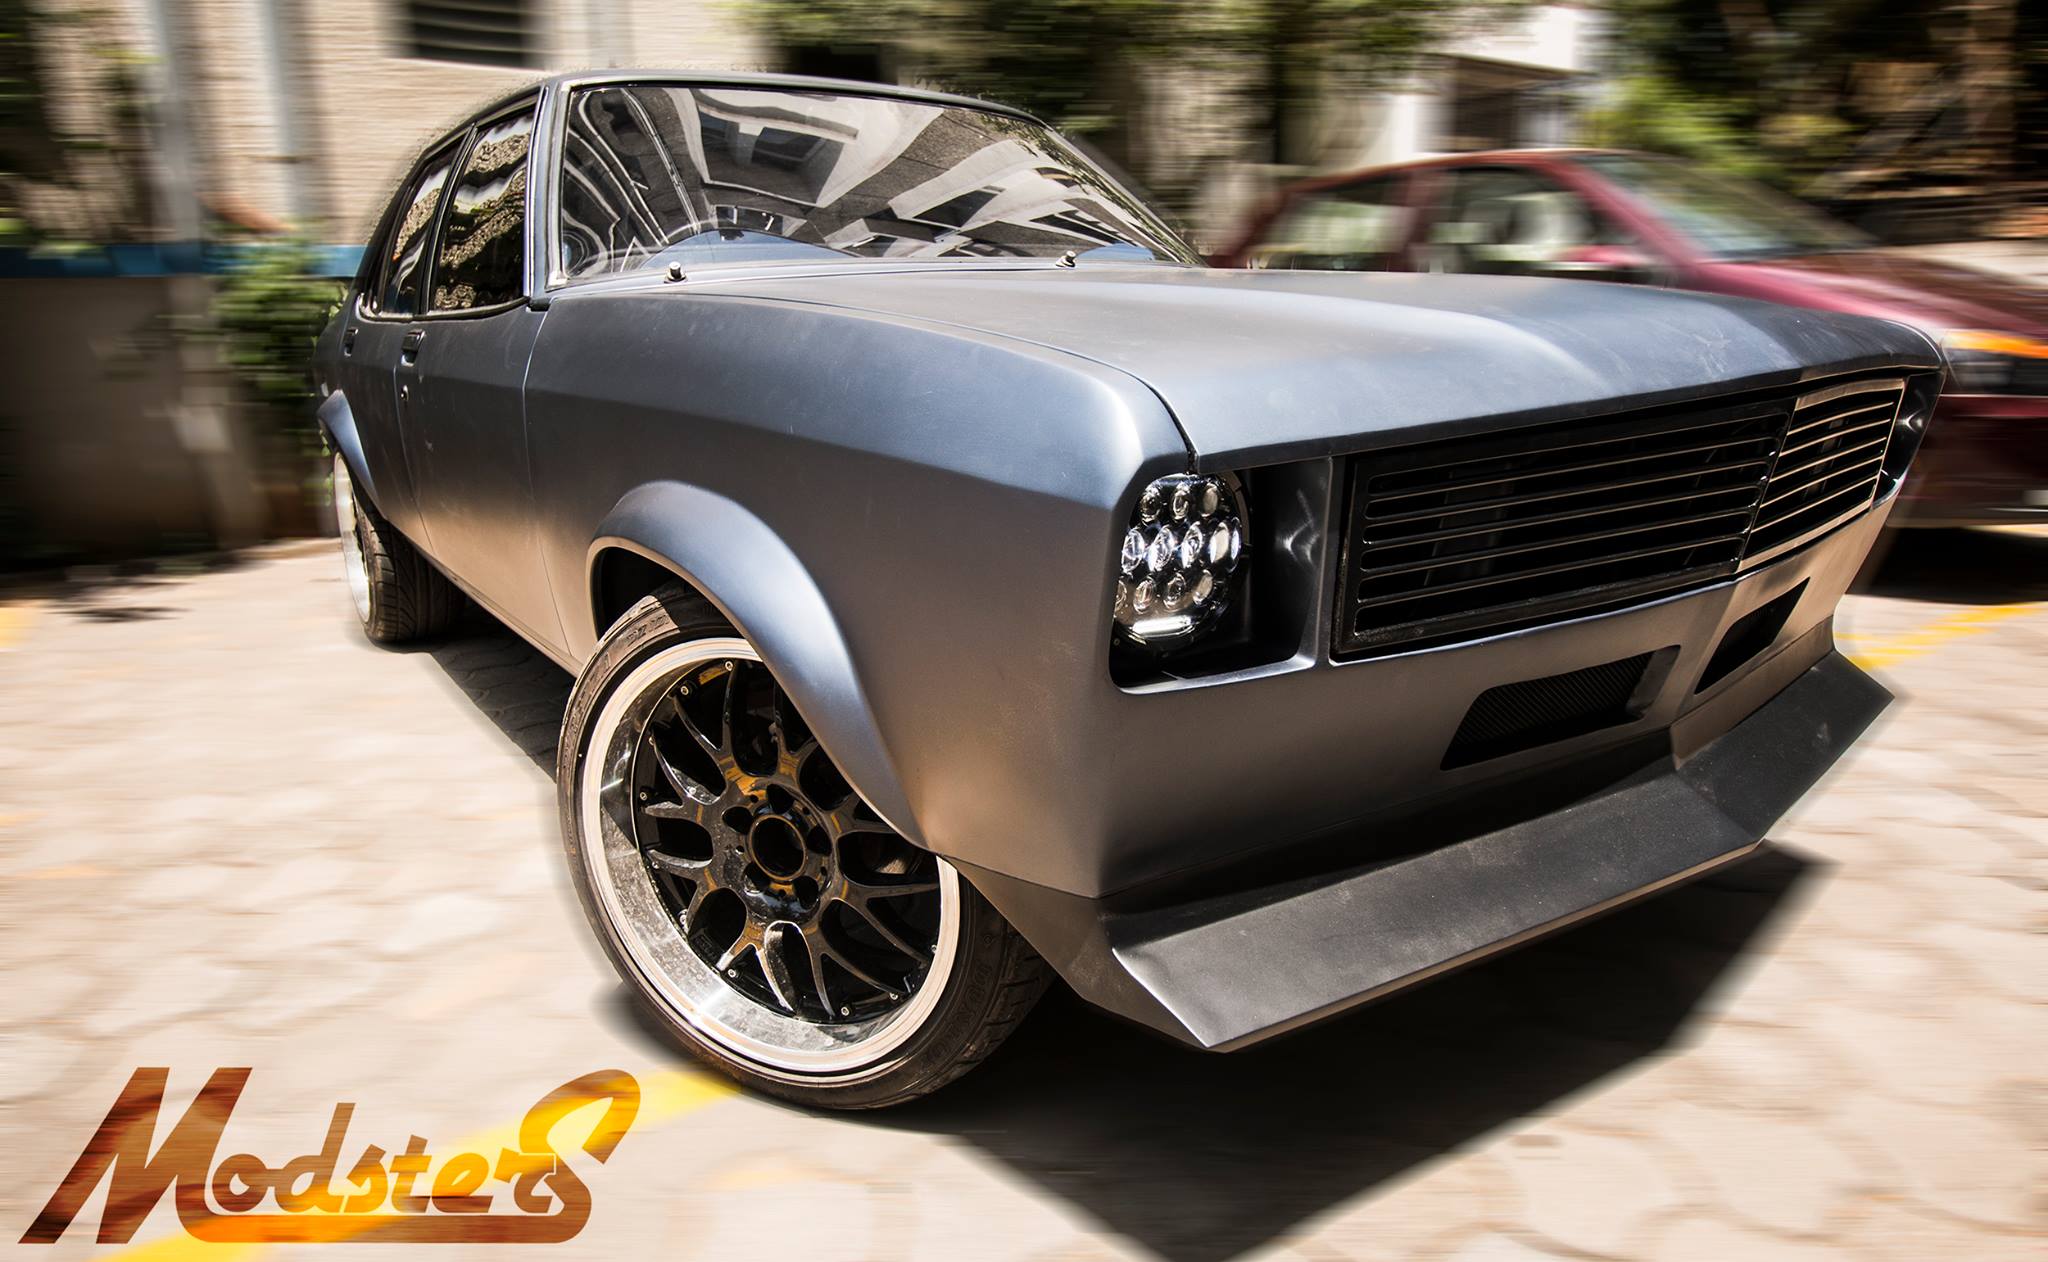 Modified Contessa Car in India with Images and All Details on Modification